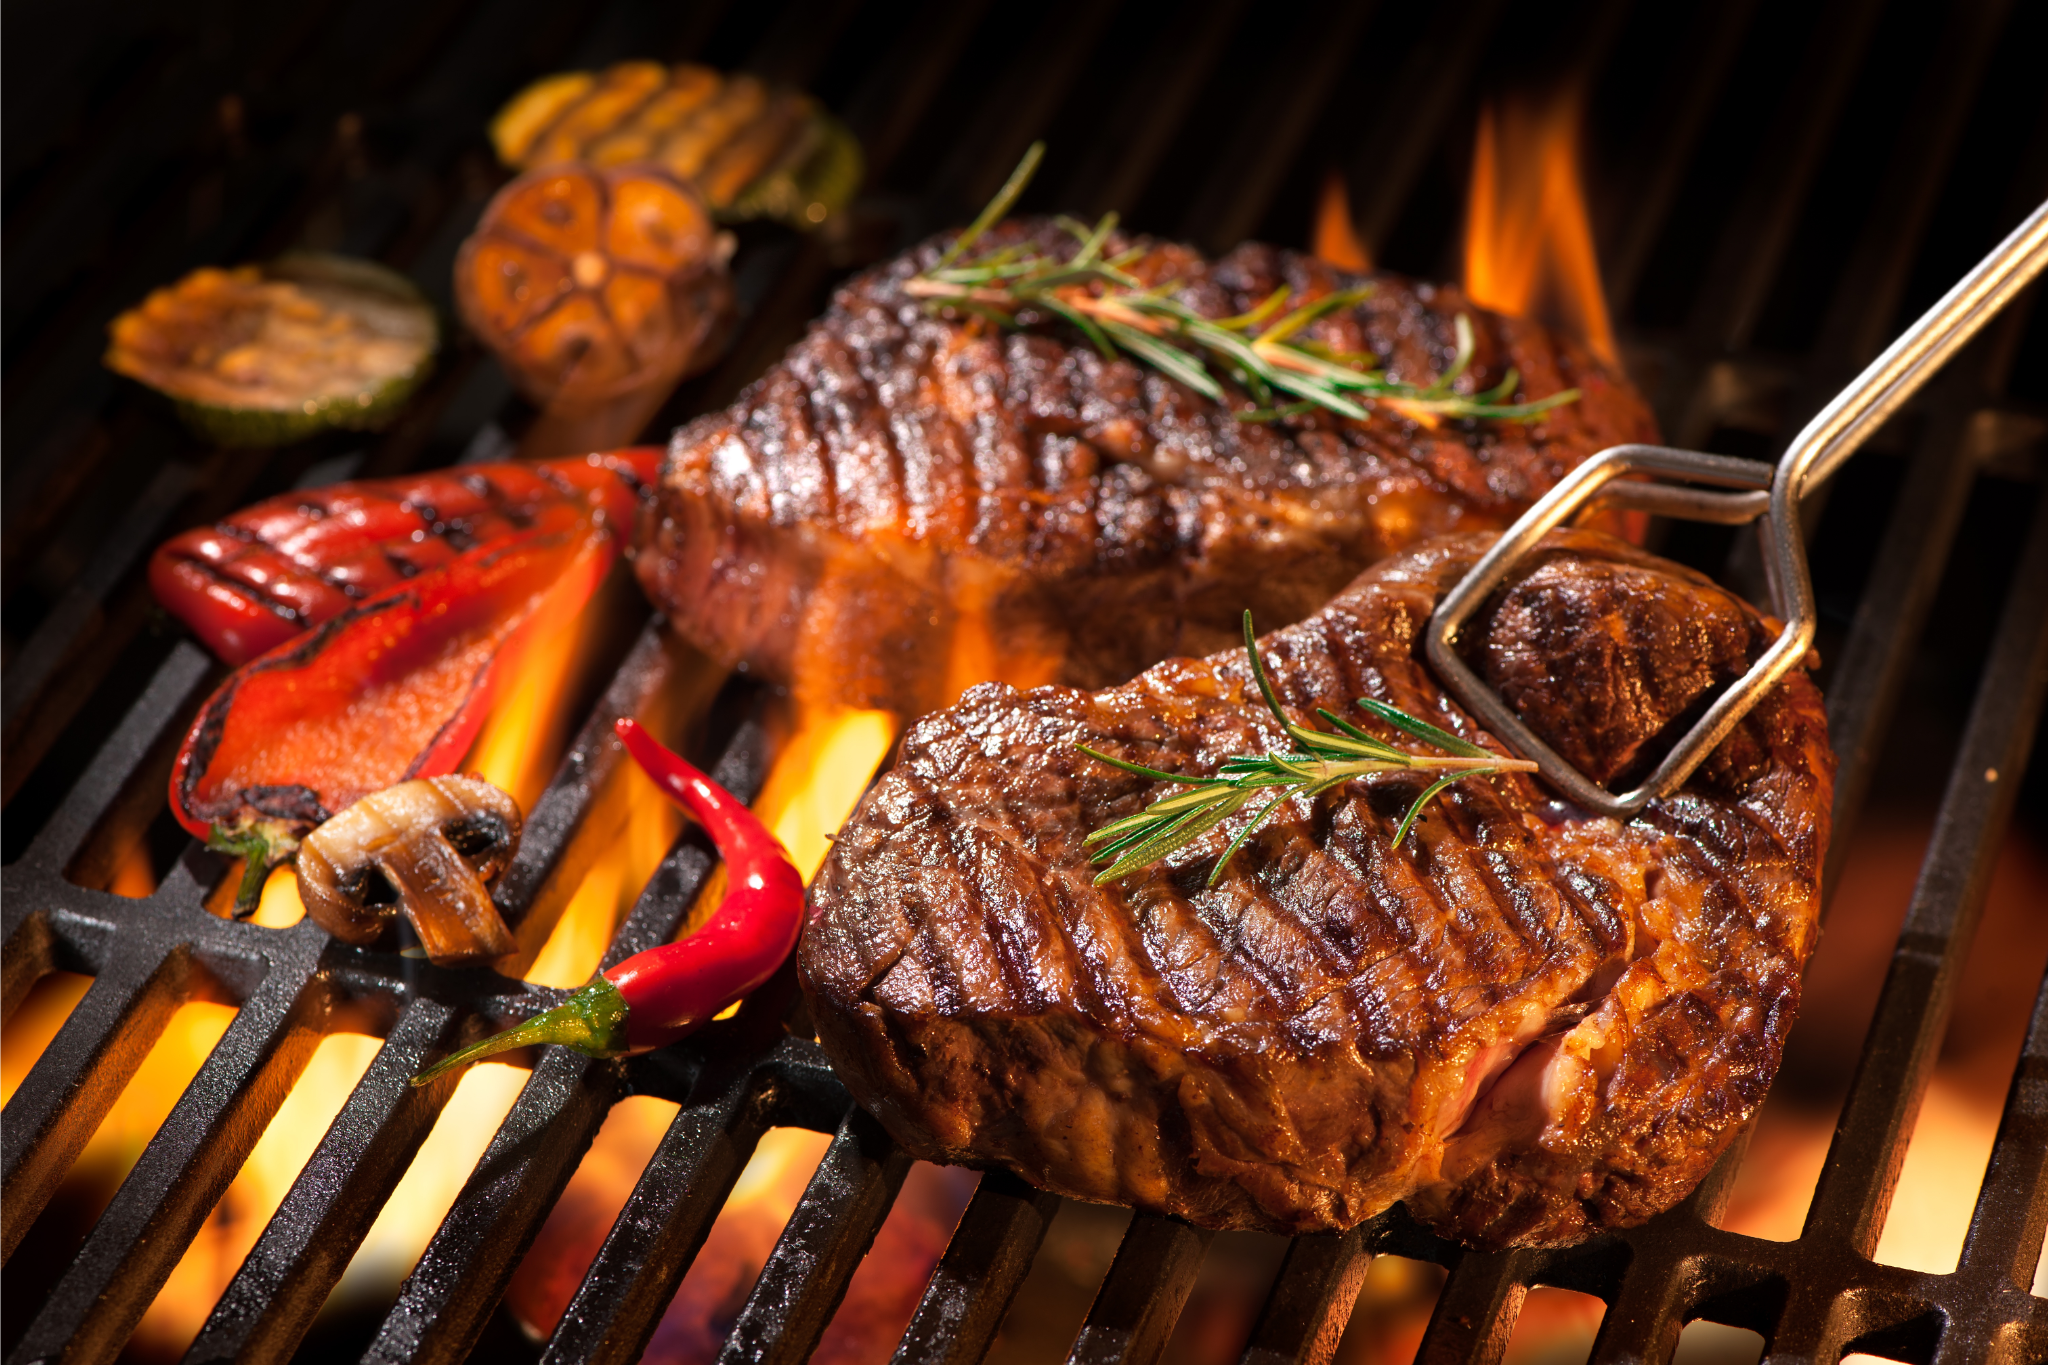 Benefits of Cooking with a Charcoal Grill